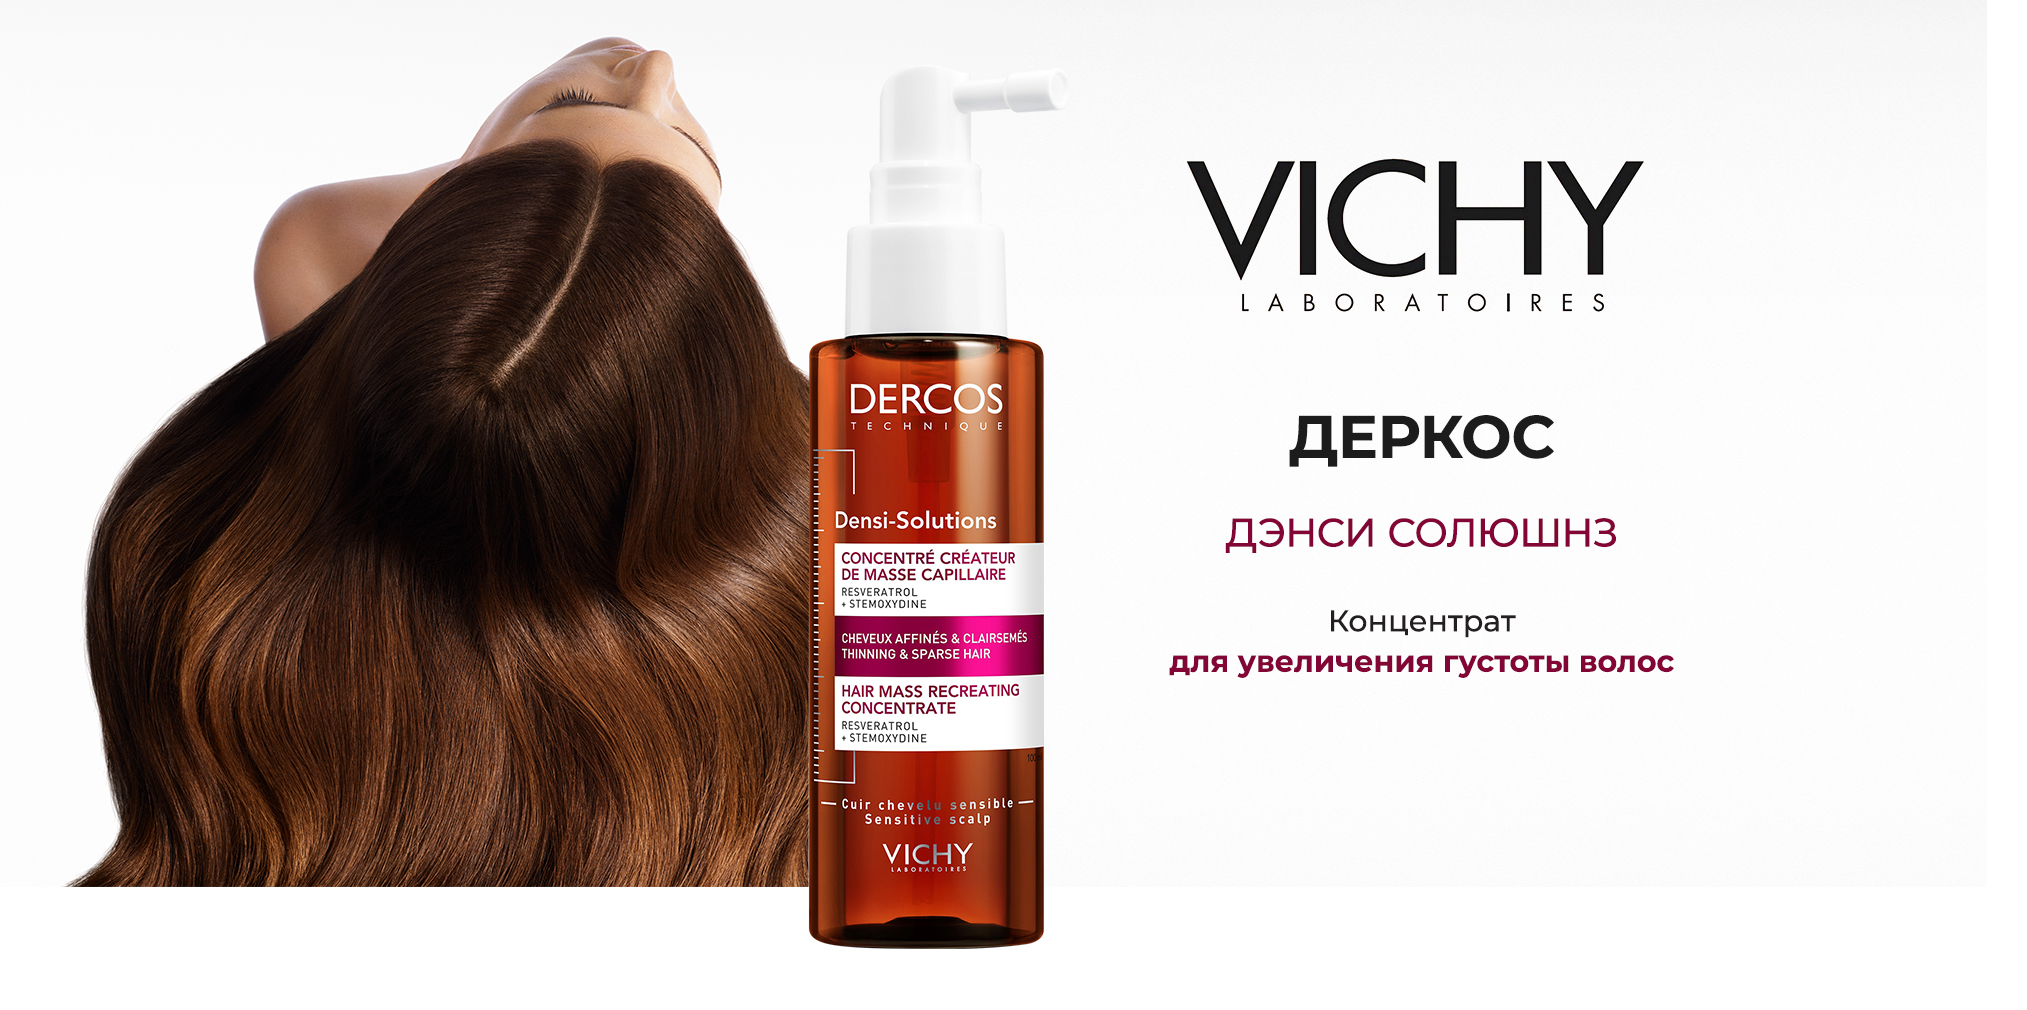 Vichy Dercos Densi-Solutions Hair Mass Recreator Concentrate